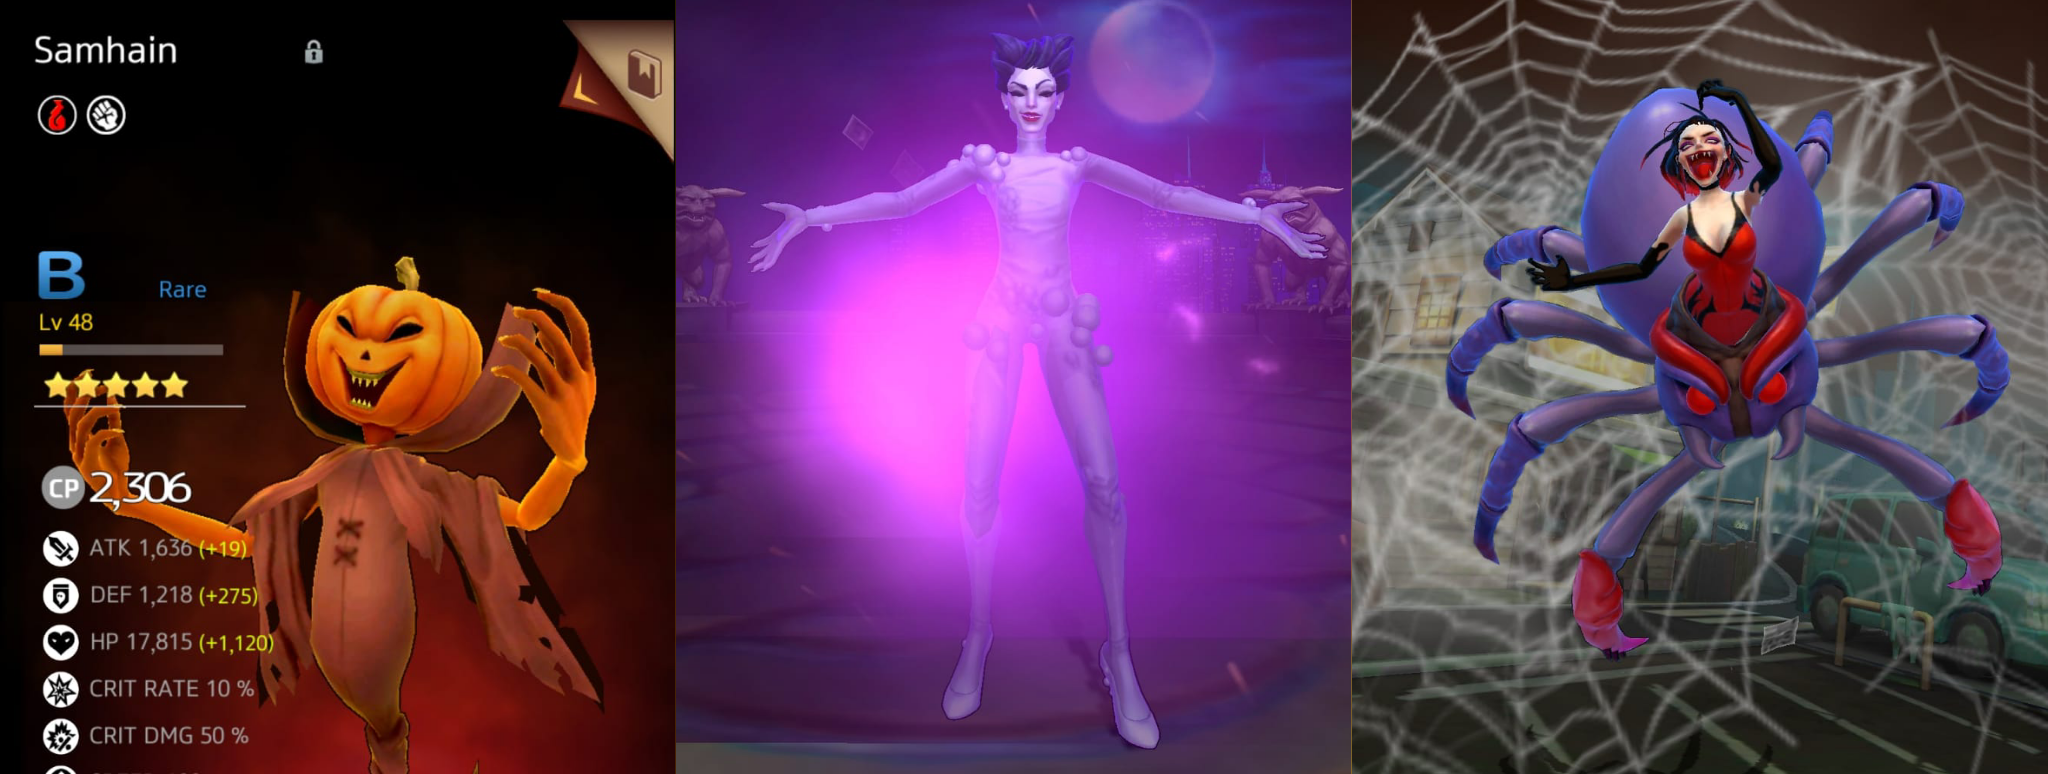 In foto: Samhain (The Real Ghostbusters), Gozer (Ghostbusters 1984), Strega dei ragni (Ghostbusters: The video game)